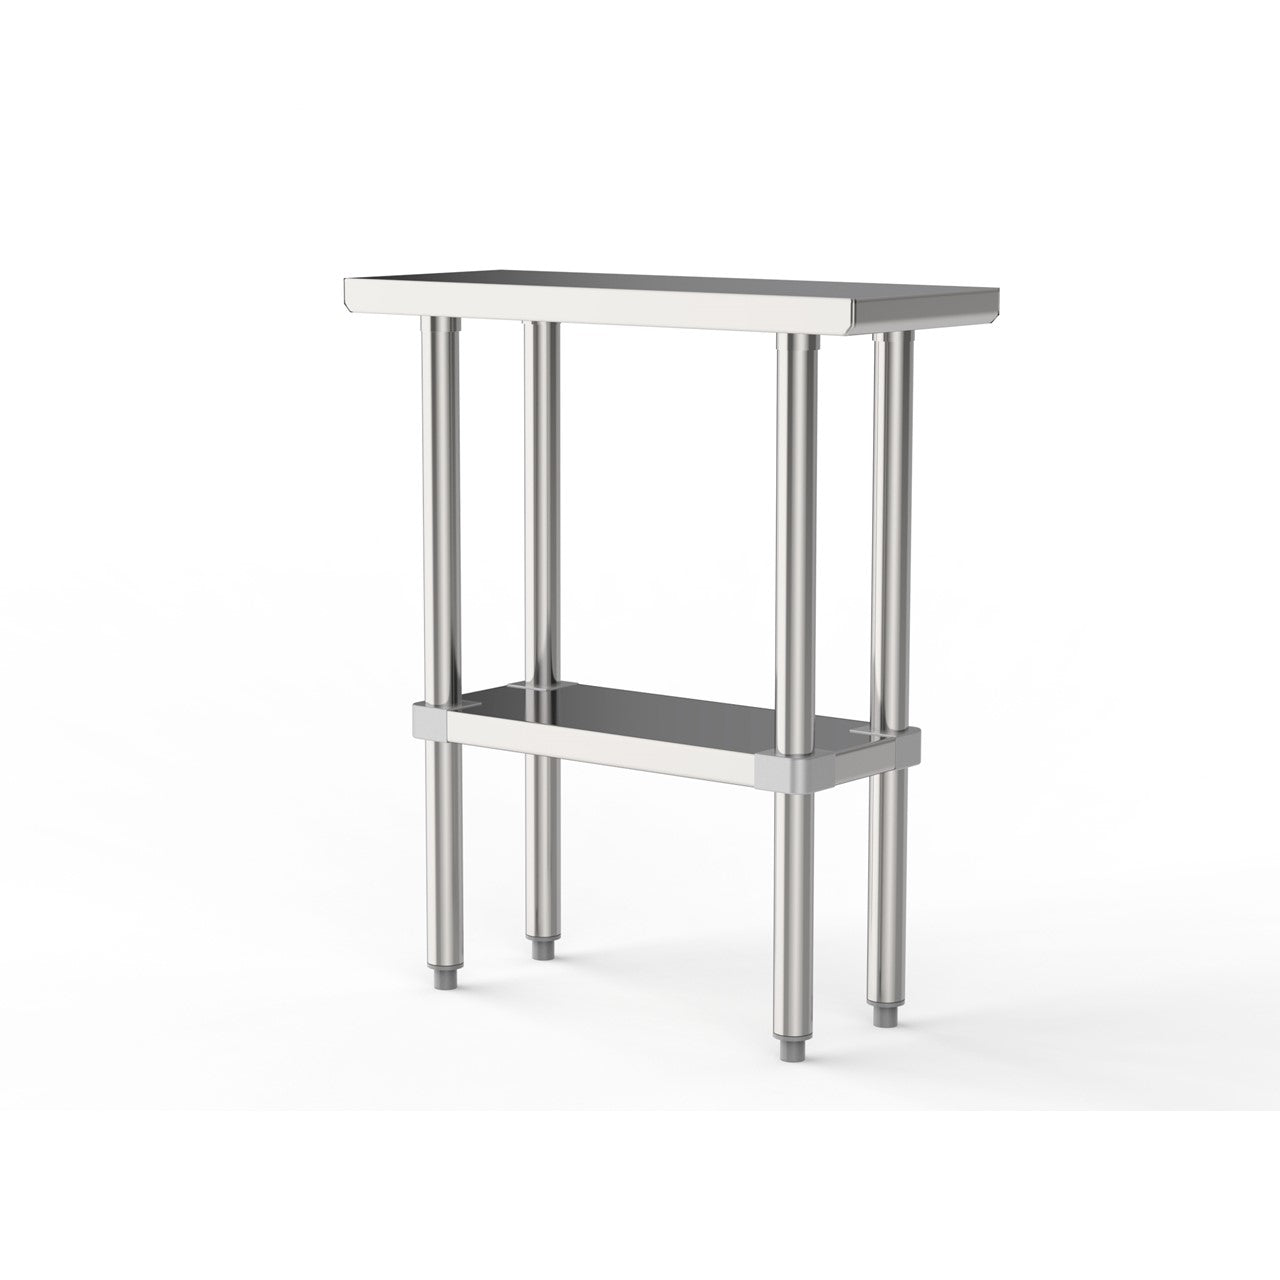 GSW Commercial Grade Flat Top Work Table with All Stainless Steel Top, Undershelf & Legs, Adjustable Bullet Feet, NSF & ETL Approved to Meet Sanitation Food Service Standard 37 (30"D x 12"L x 35"H)